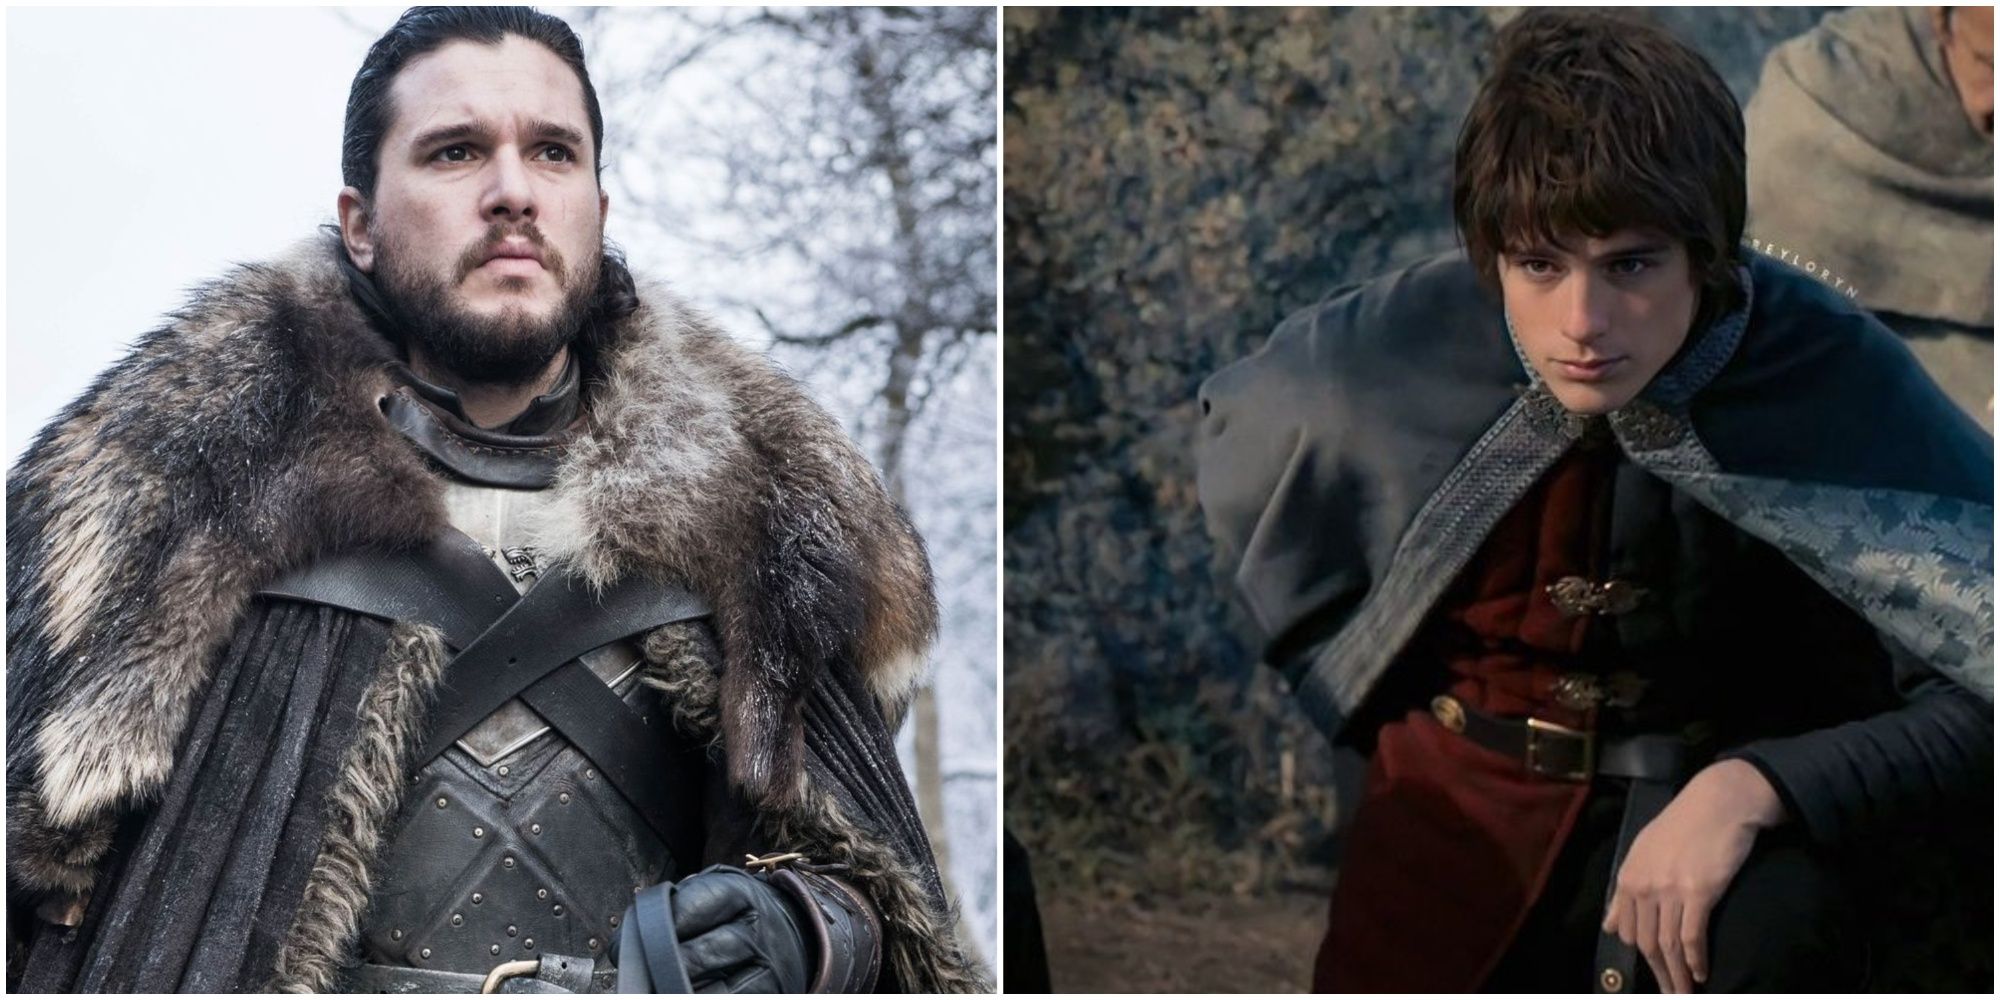 Split image of Jon Snow in Game of Thrones and Jacaerys Velaryon in House of the Dragon.